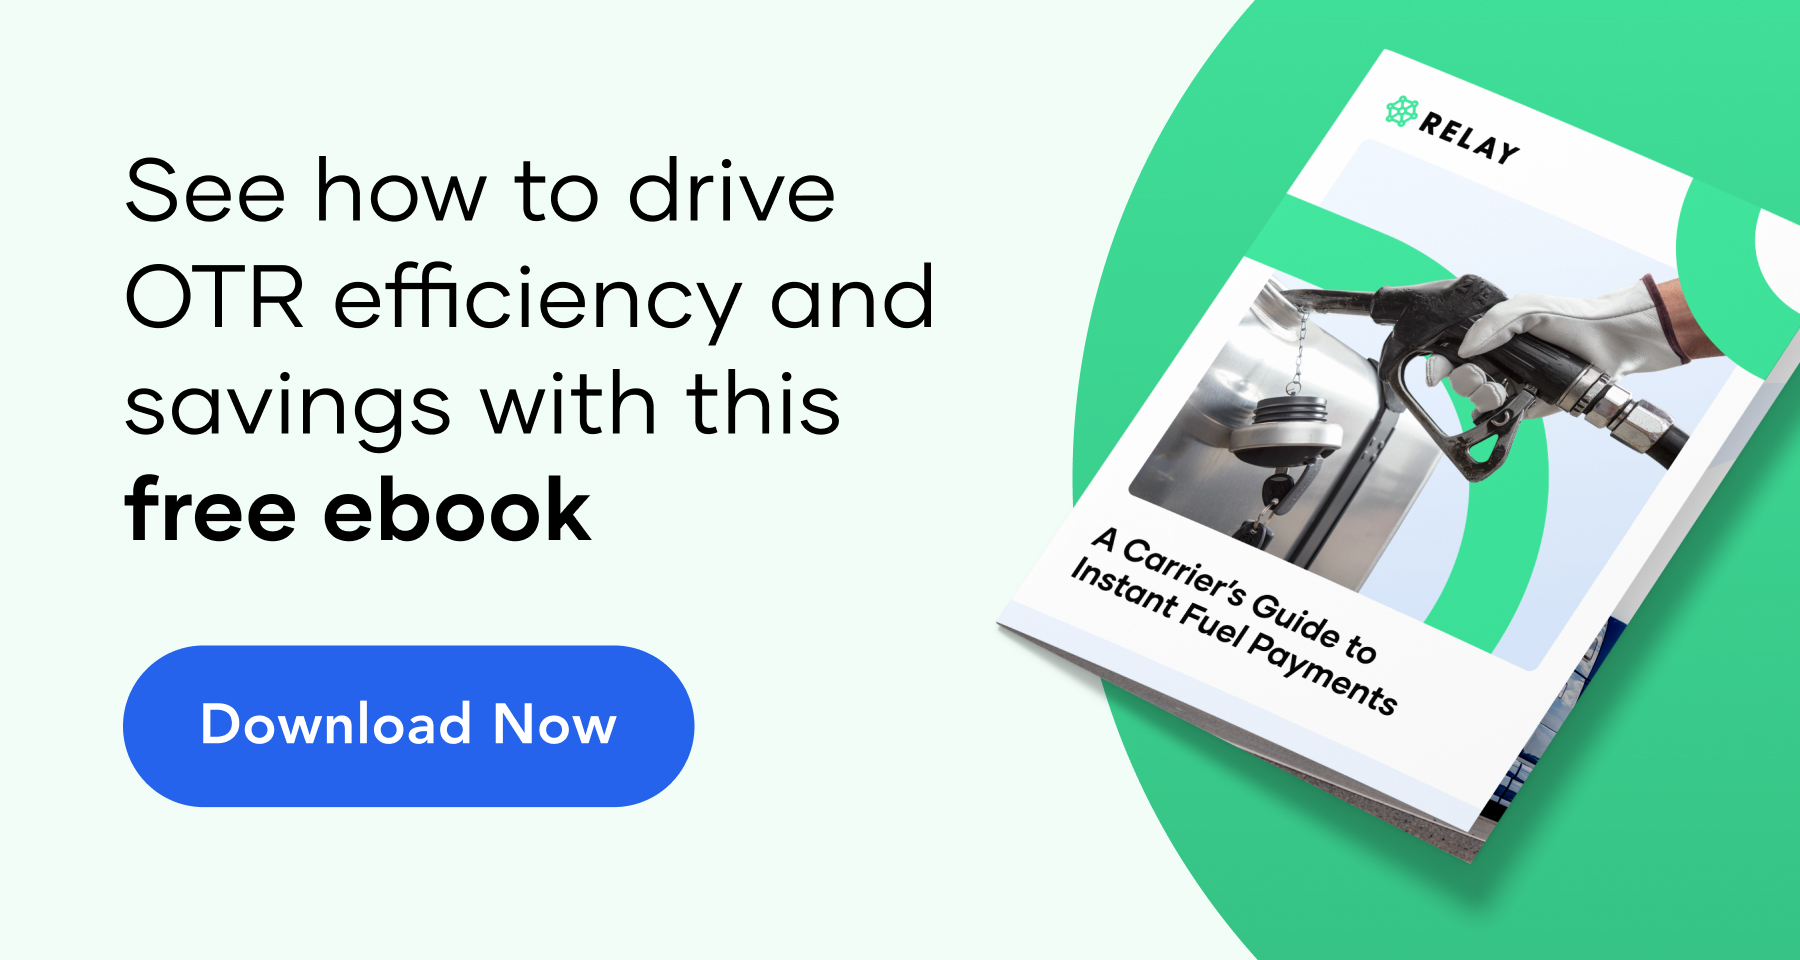 Download the free ebook: A Carrier's Guide to Instant Fuel Payments